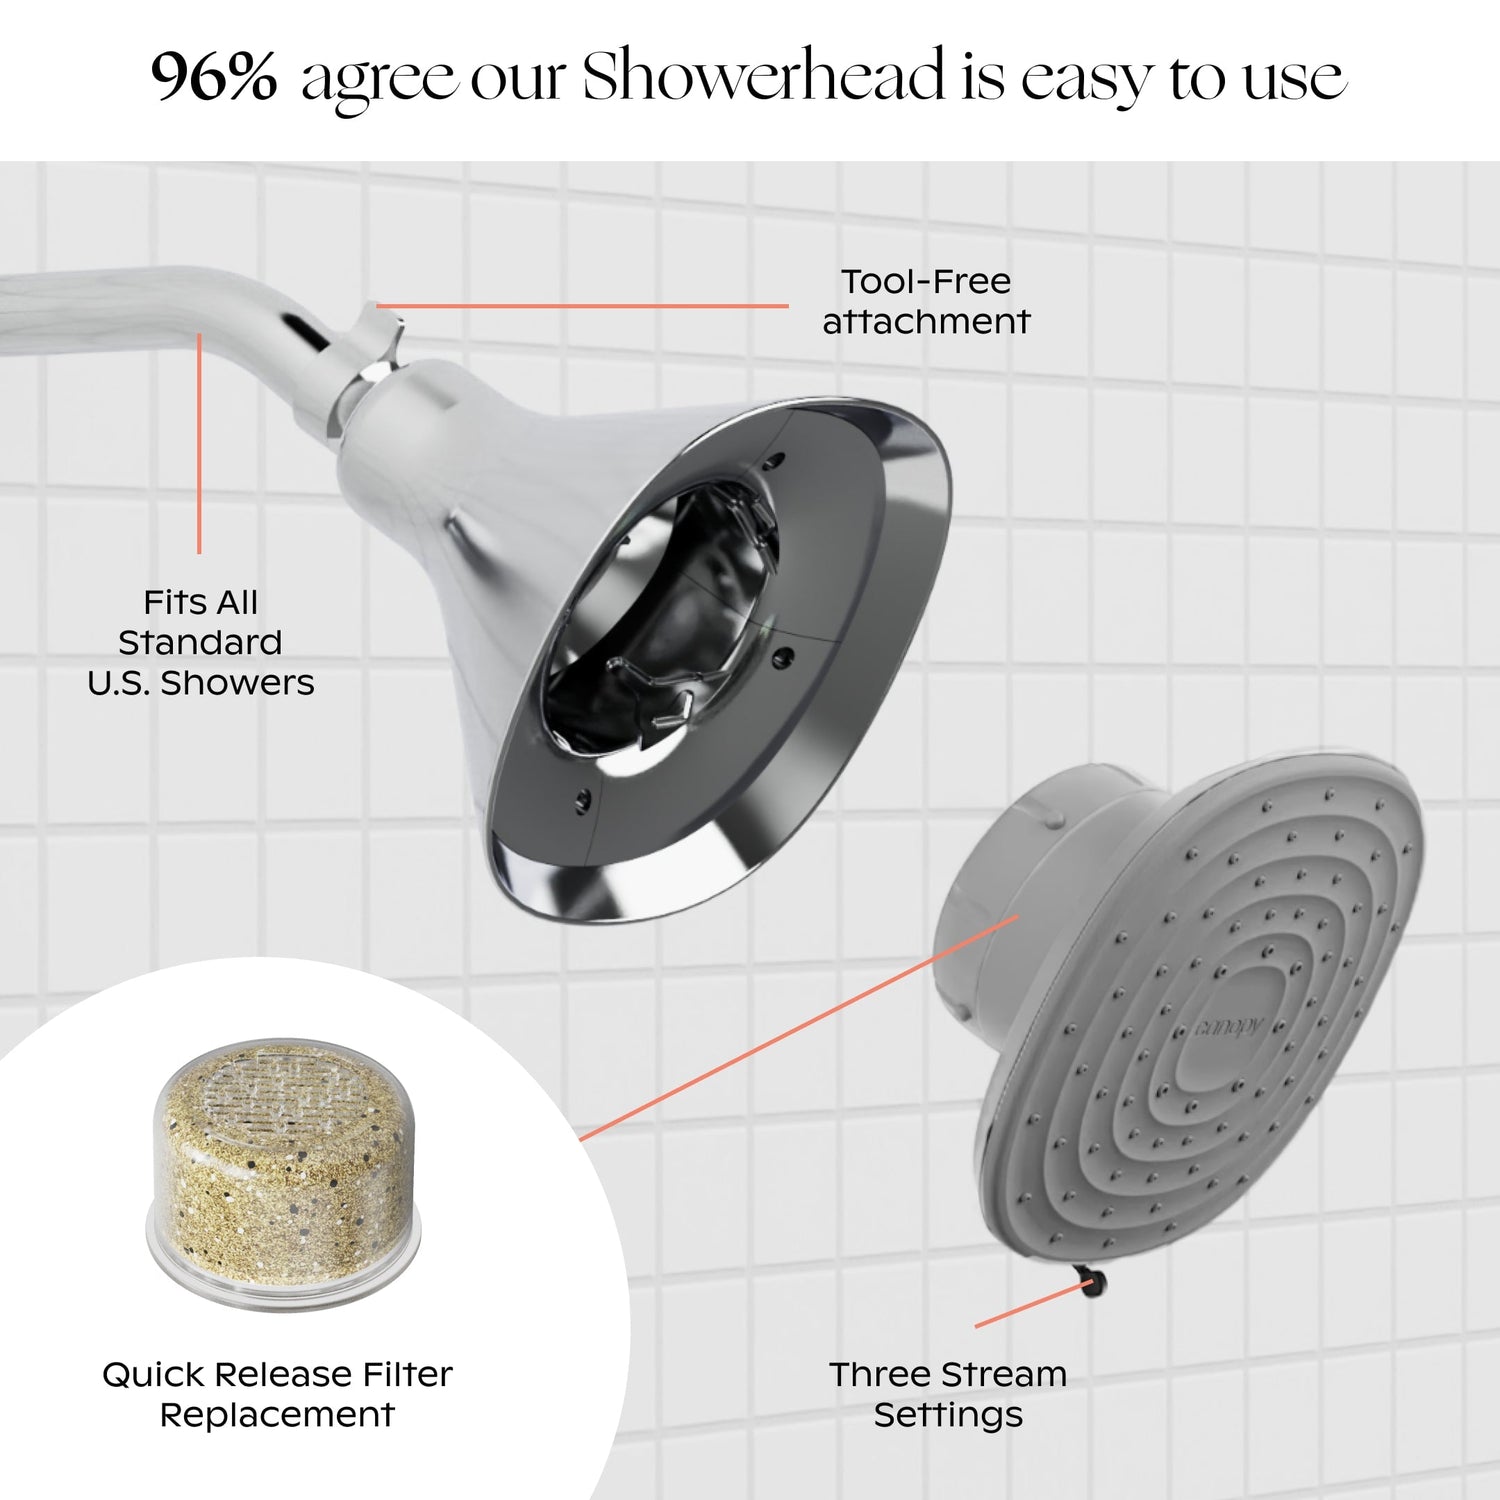 Filtered Showerhead | Lifestyle, 96% agree our Showerhead is easy to use